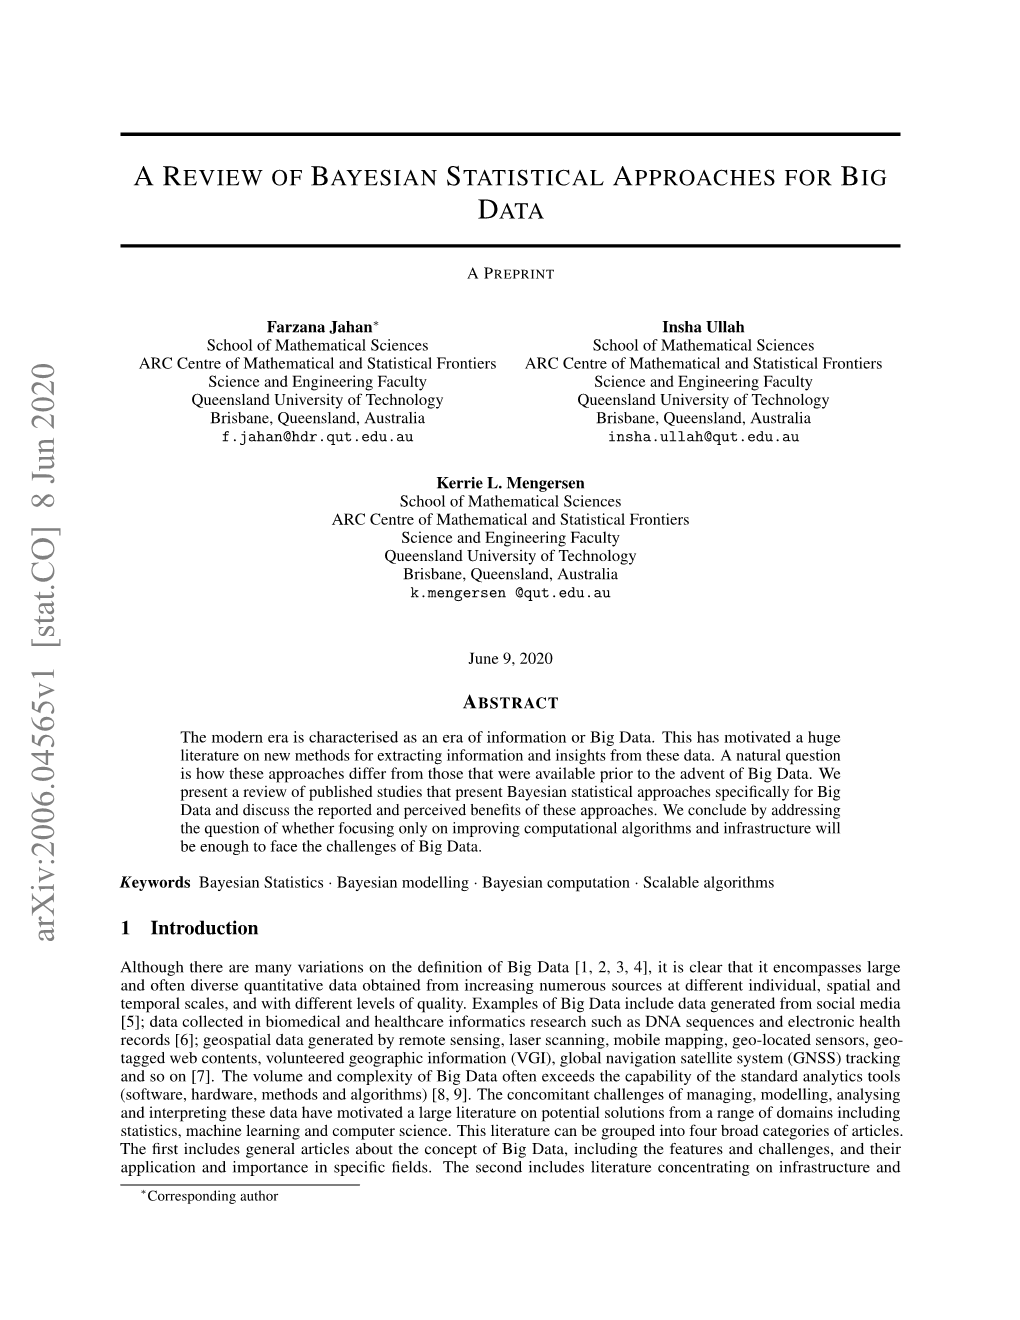 Areview of Bayesian Statistical Approaches for Big Data